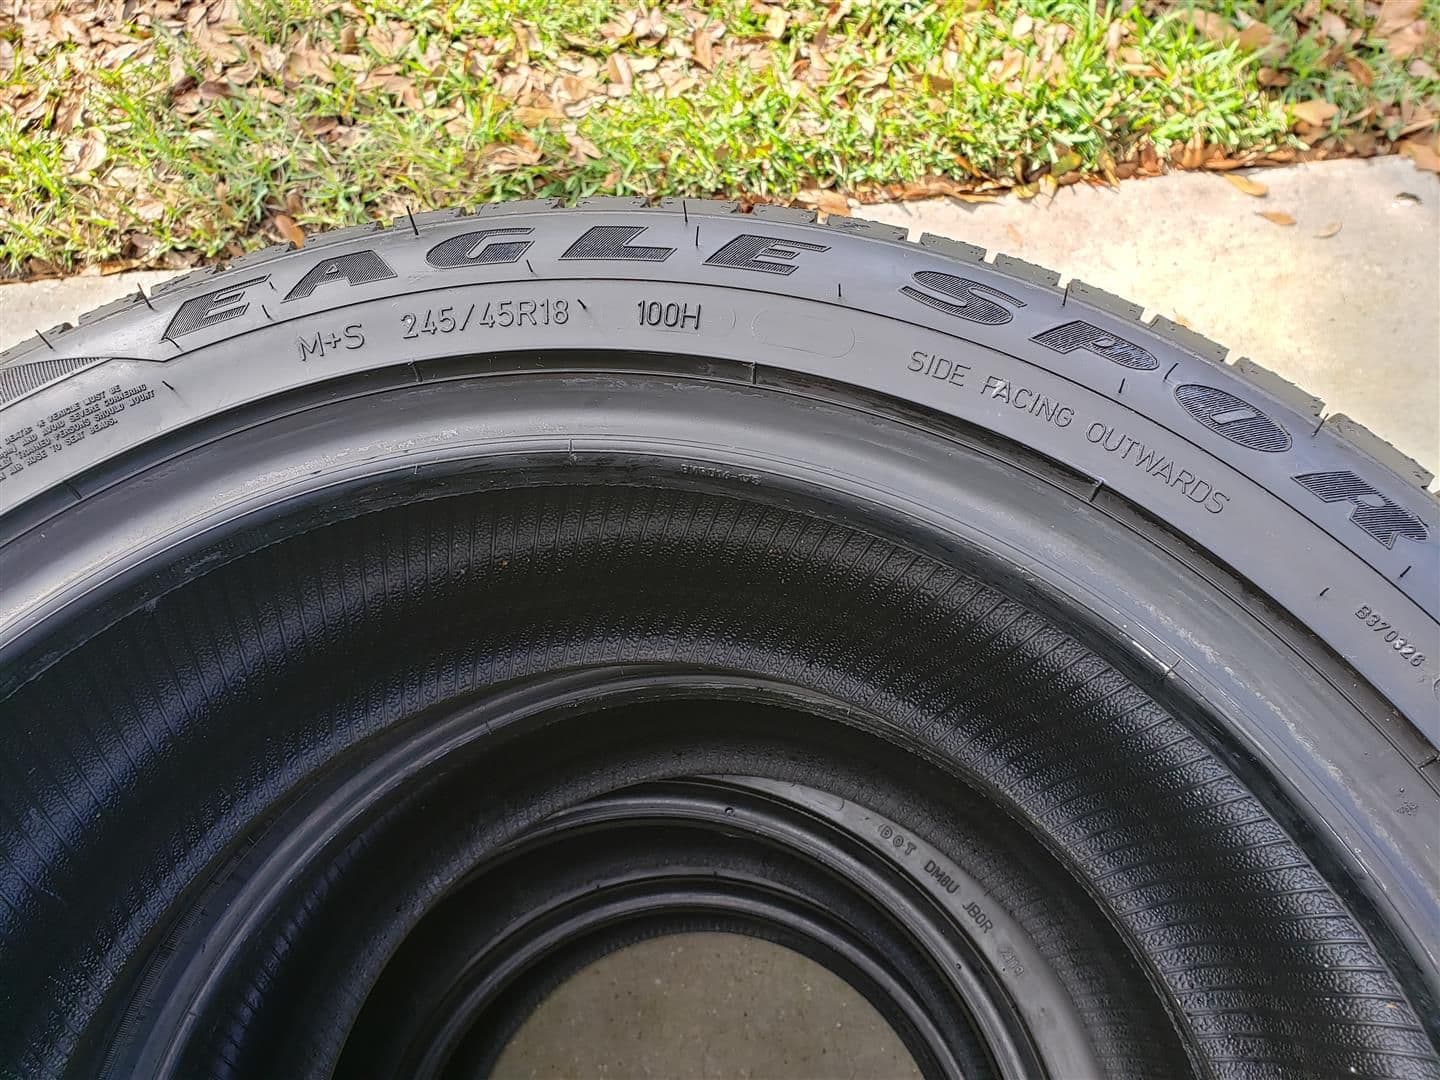 Wheels and Tires/Axles - NEW GOODYEAR EAGLE SPORT RUN FLAT TIRES (set of 4) $849 - New - 2017 to 2019 Mercedes-Benz E300 - Tampa, FL 33612, United States